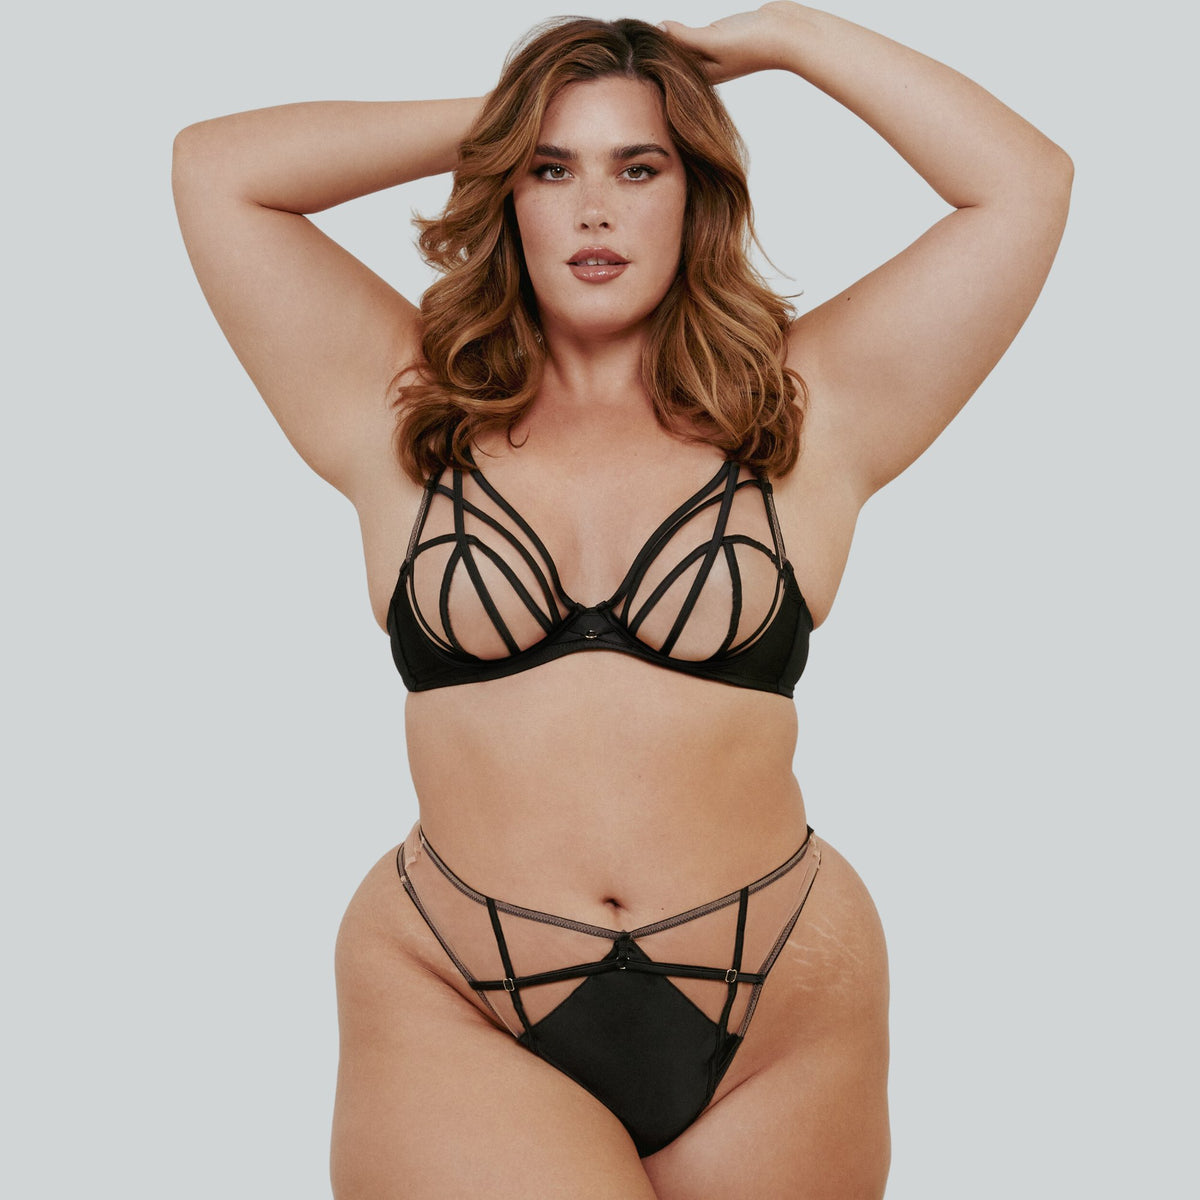 Follow Your Curves ~ New Curvy Couture Sexy Sheer Bras - Lingerie